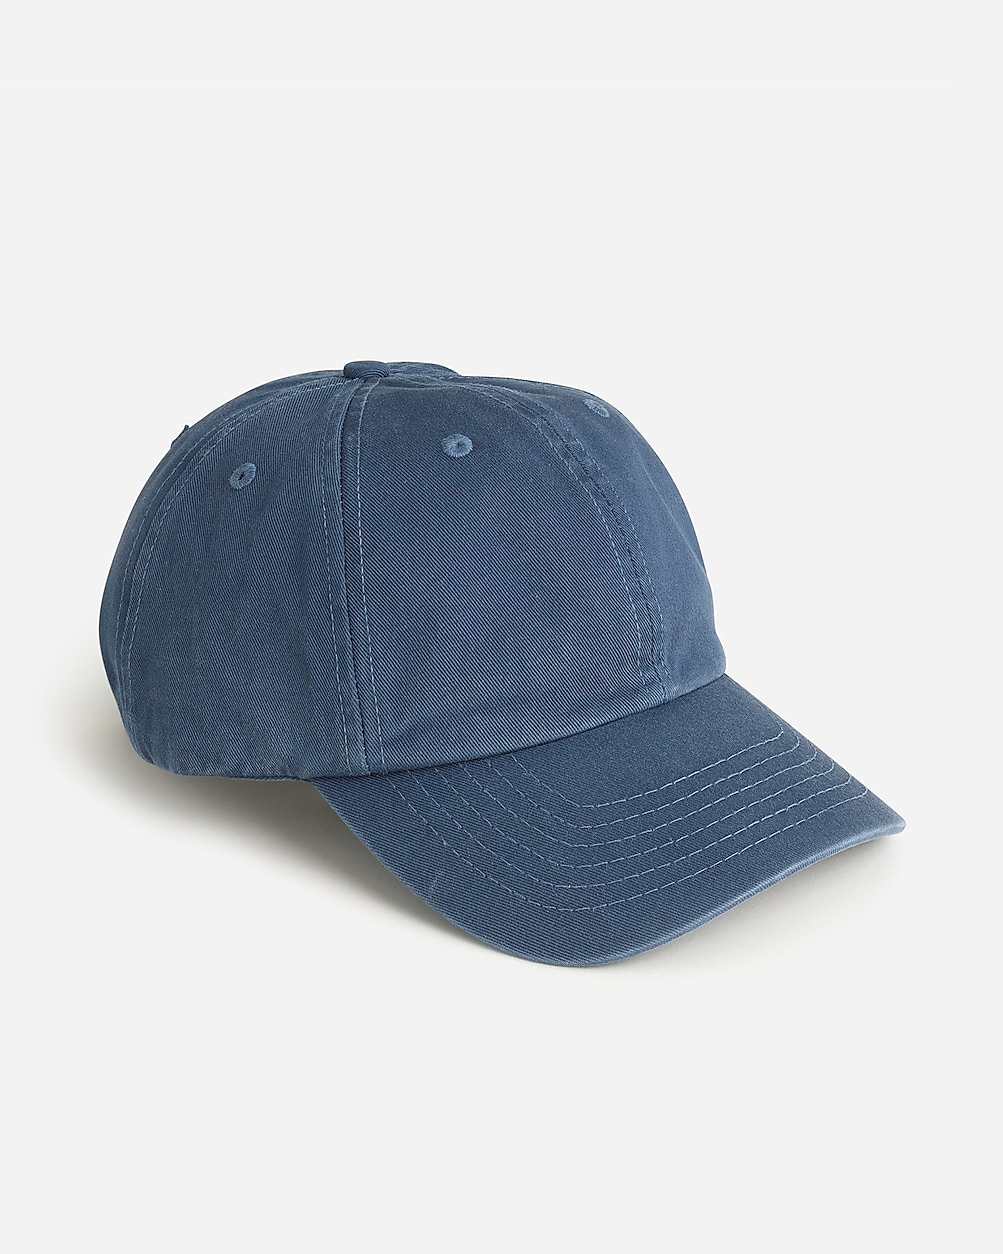 J.Crew: Made-in-the-USA Garment-dyed Twill Baseball Cap For Men